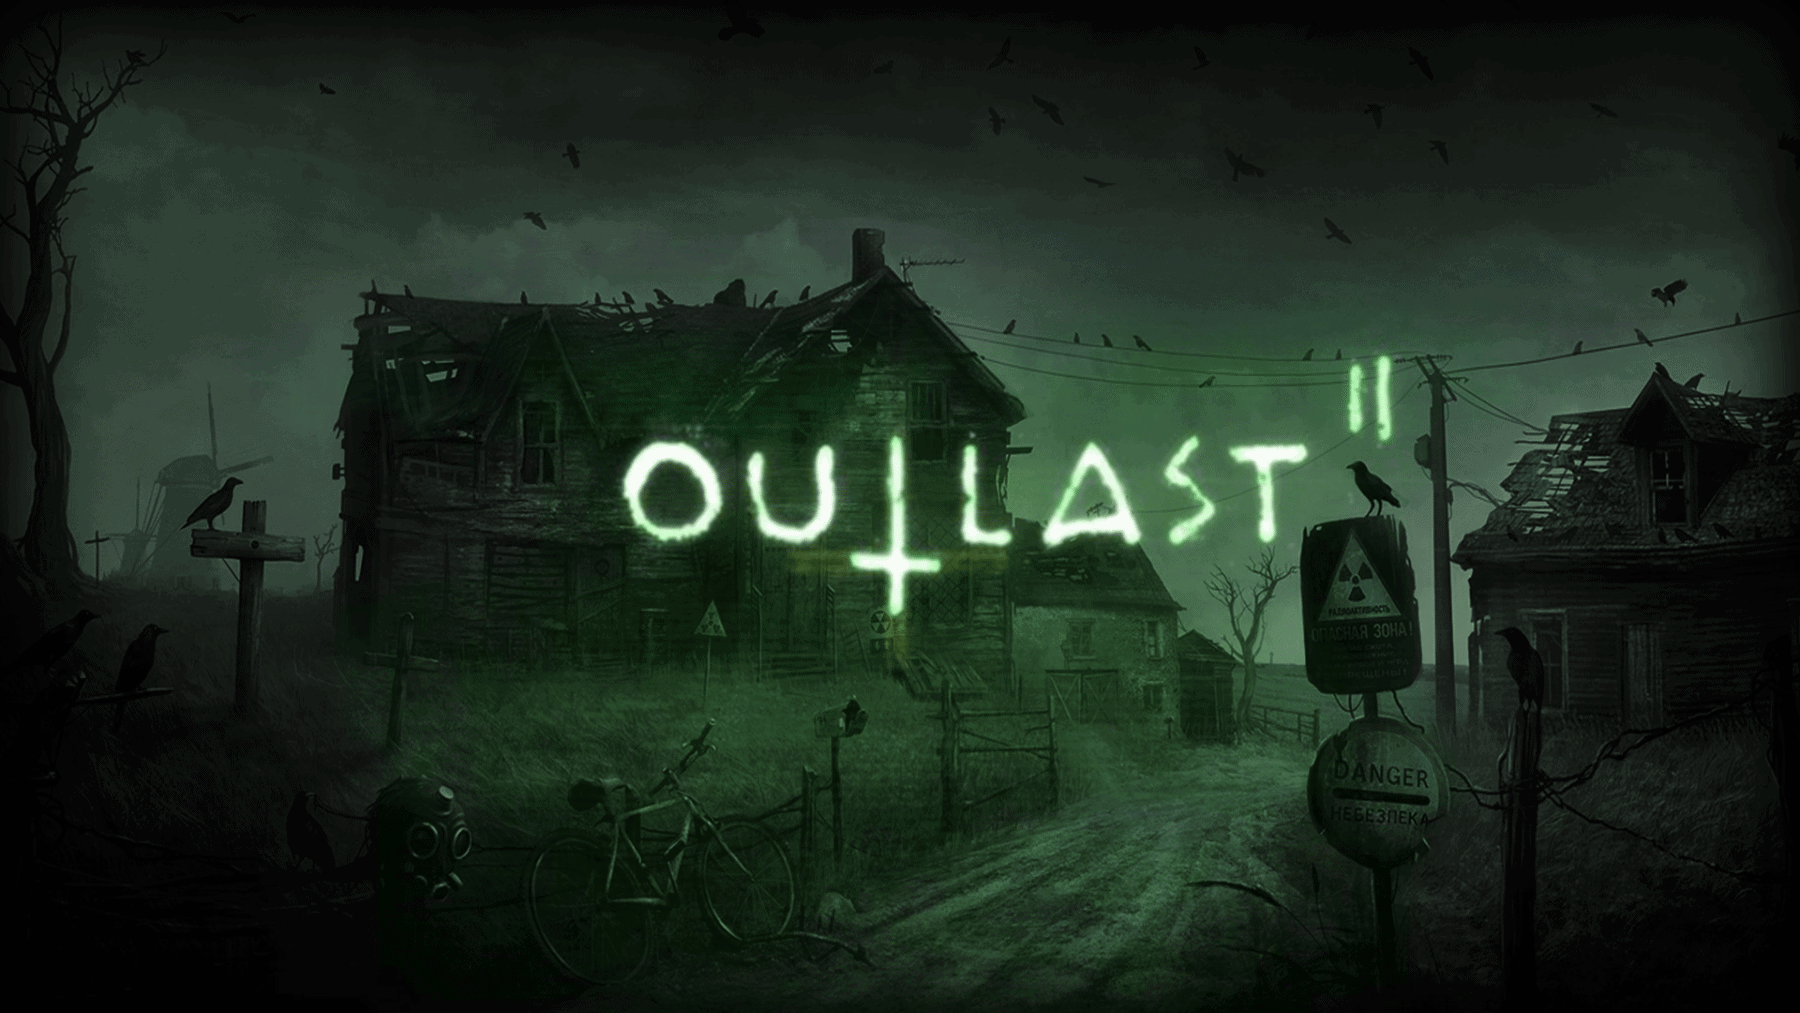 boog activering Elke week Game Review: Outlast II (Xbox One) - GAMES, BRRRAAAINS & A HEAD-BANGING LIFE